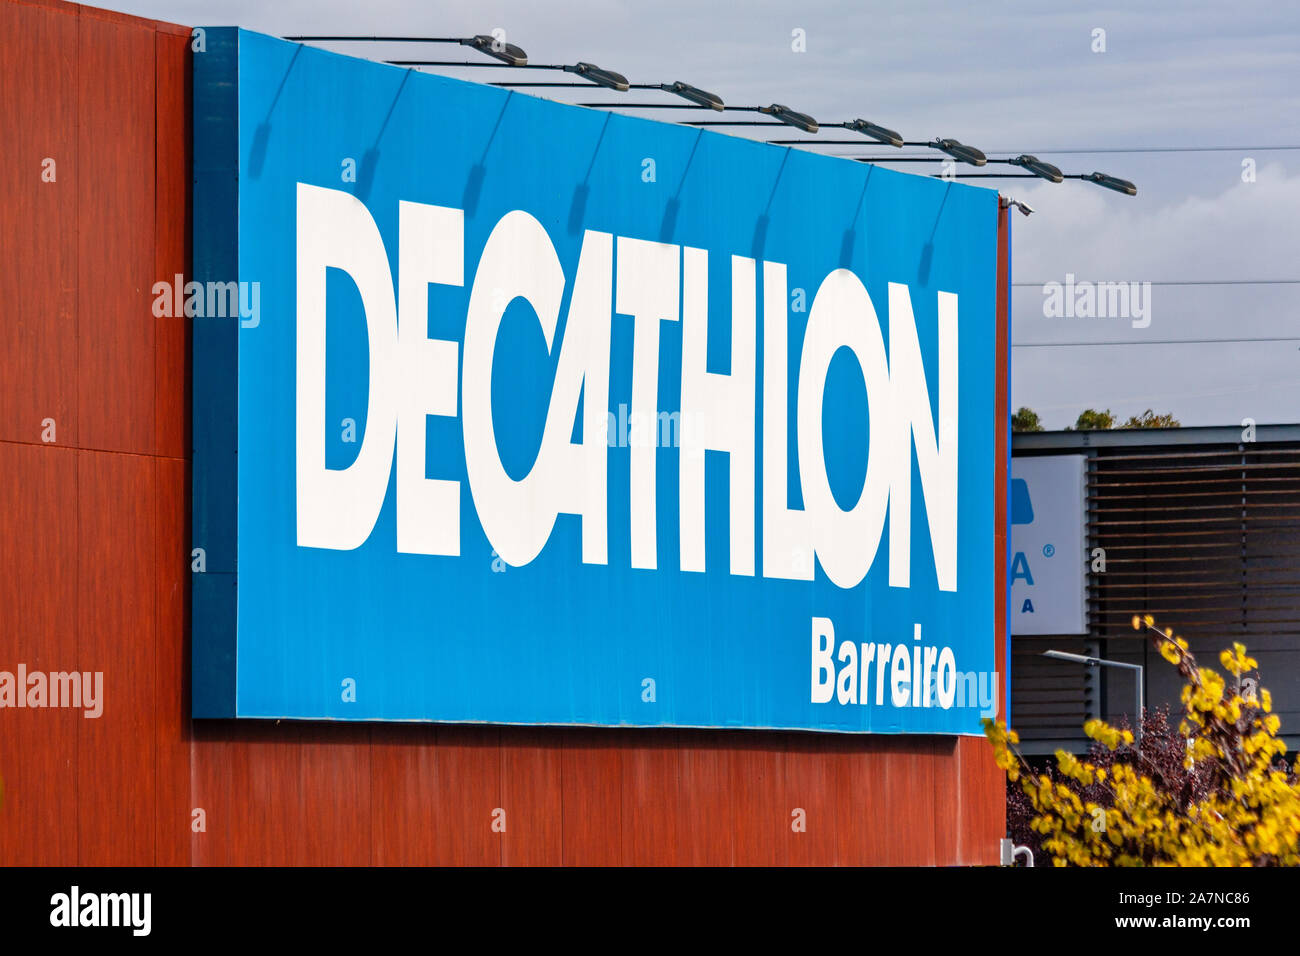 Coina, Portugal. Signboard of the Decathlon store in the Barreiro Planet Retail Park. Decathlon is a French company and the largest sporting goods. Stock Photo